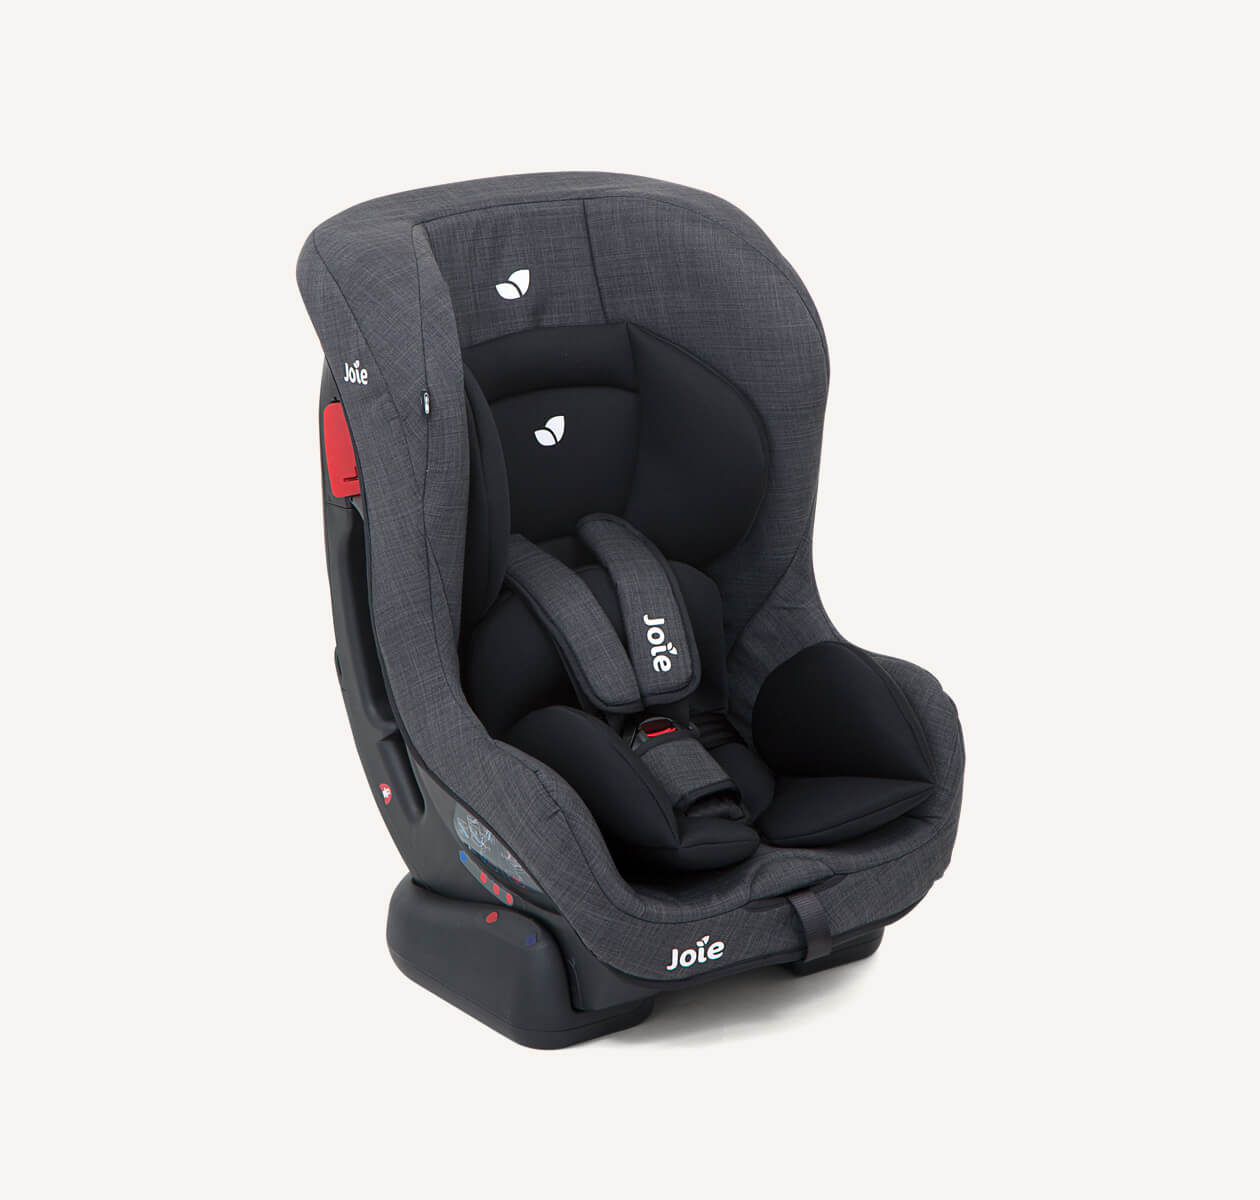  joie tilt car seat in the color pavement gray on a right angle